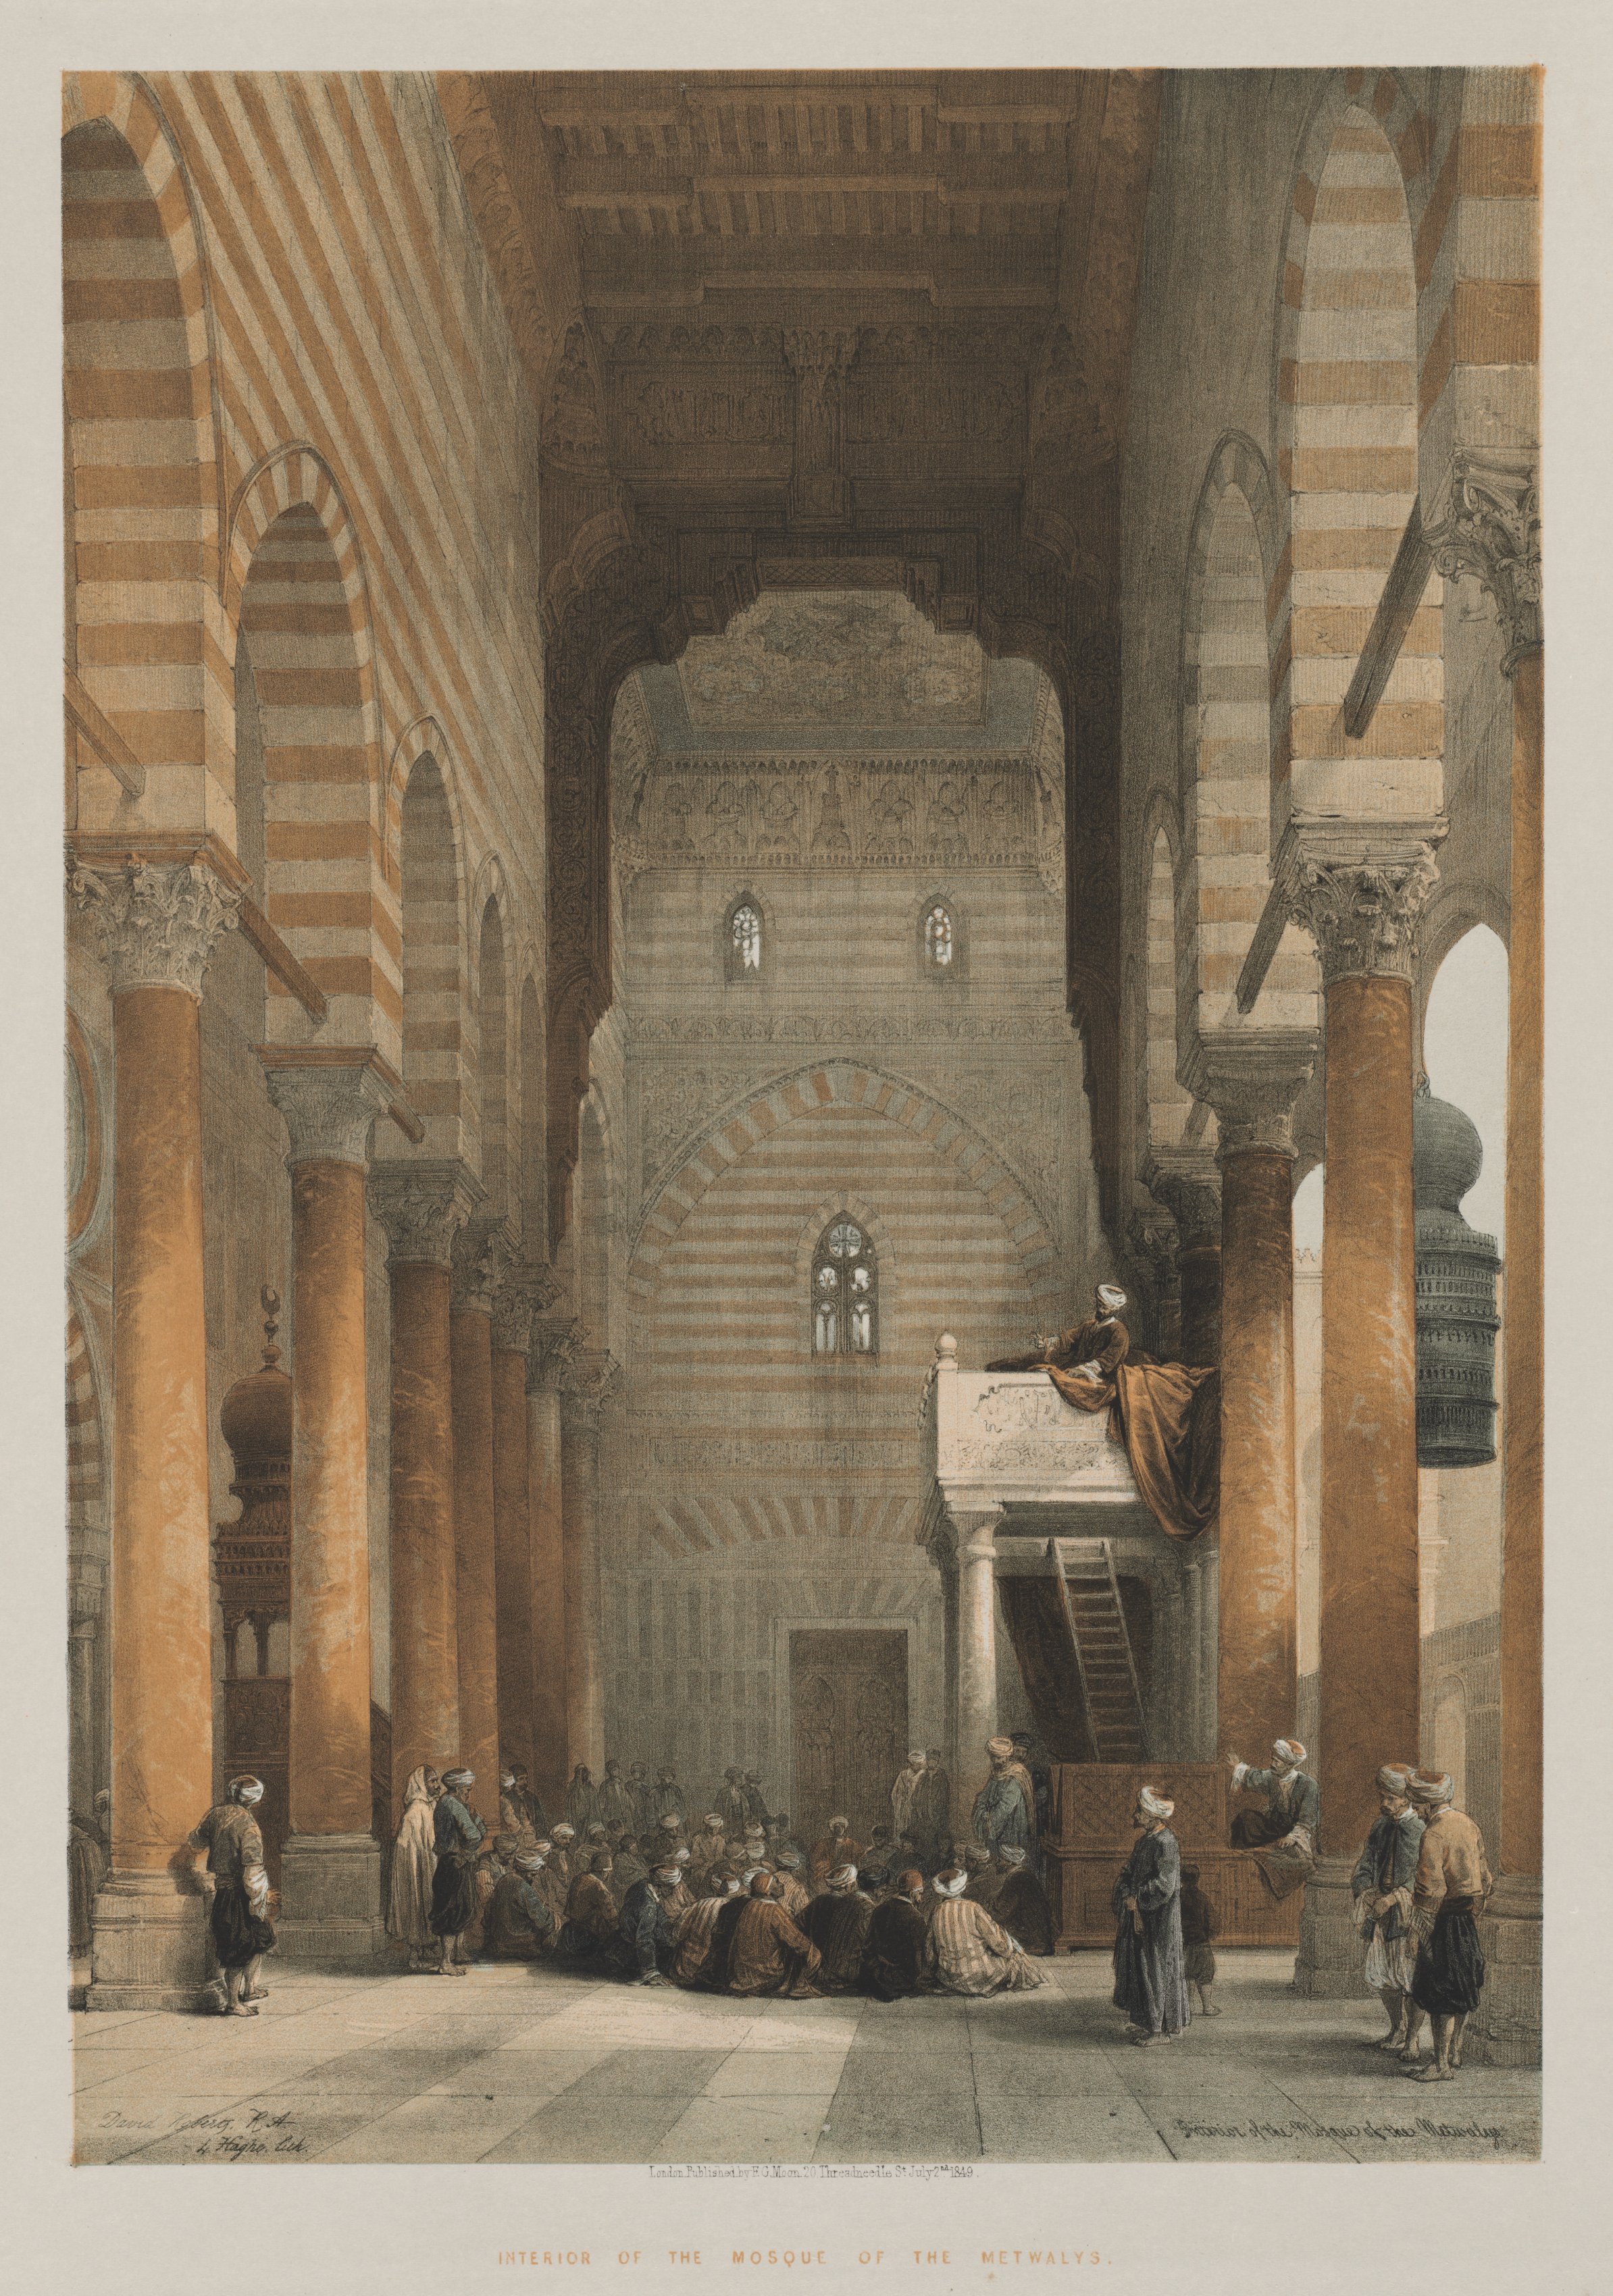 Egypt and Nubia, Volume III: Interior of the Mosque of the Metwalys